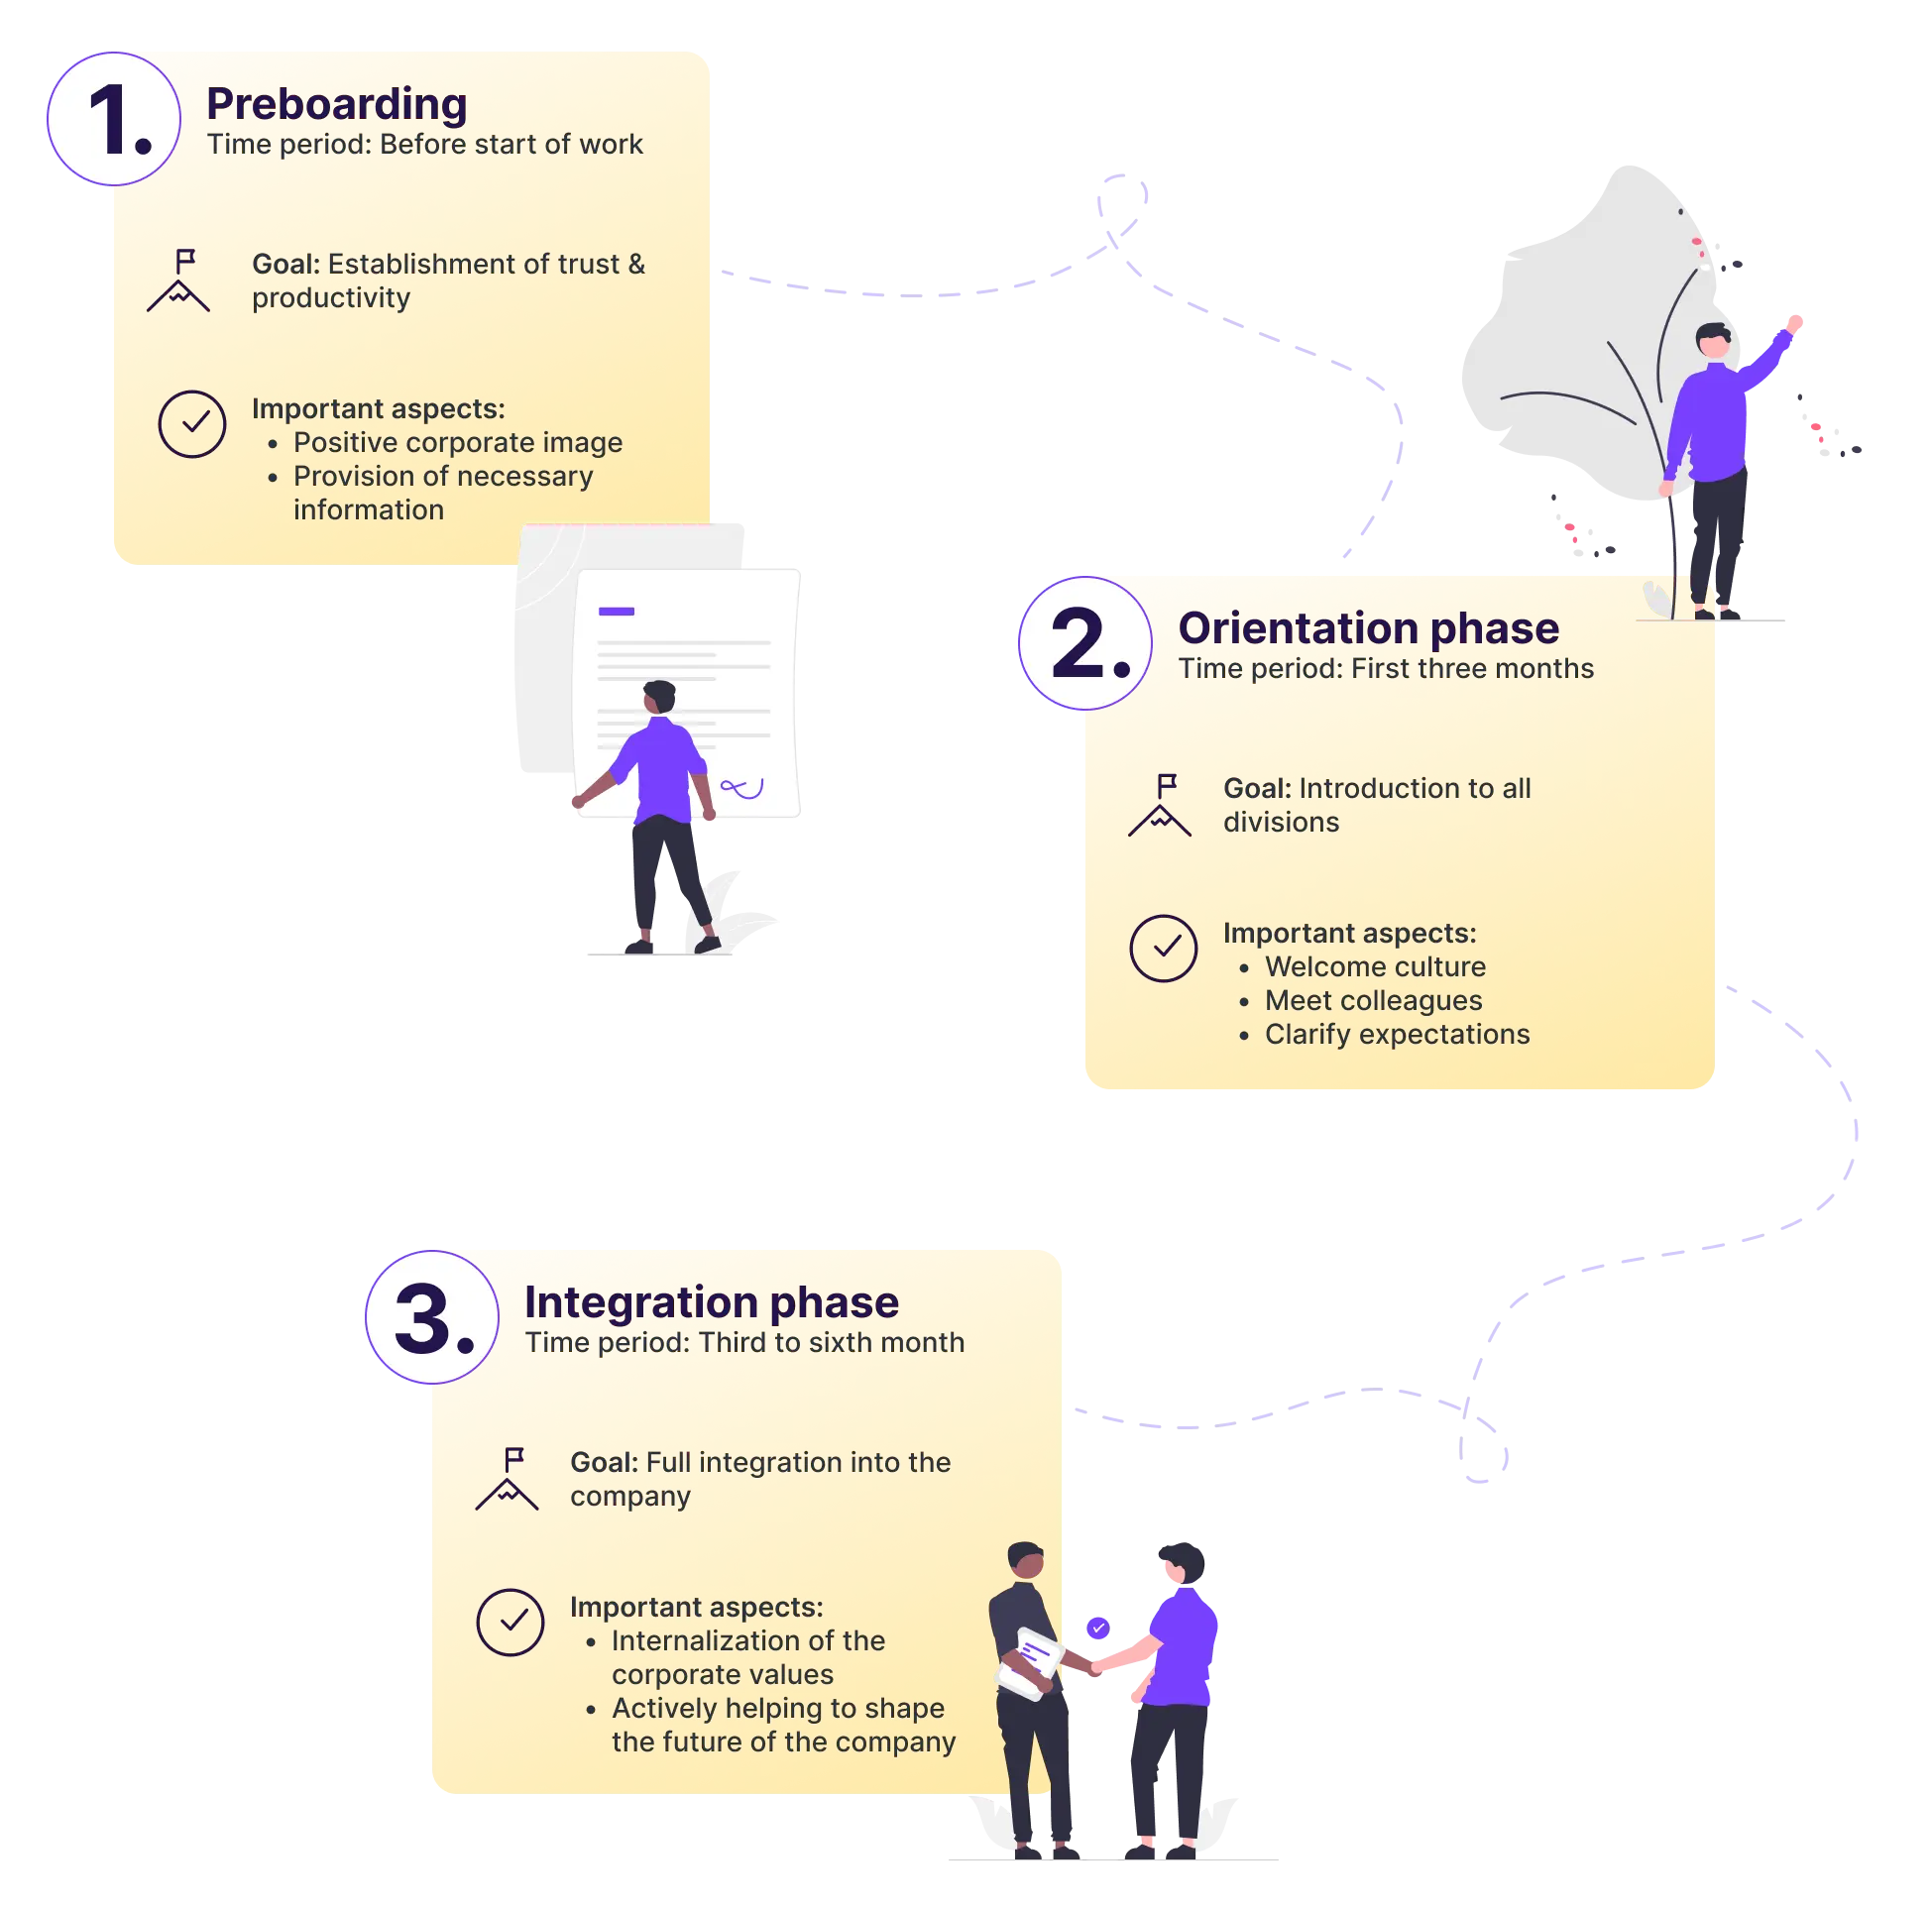 Infographic: The 3 phases of the onboarding process